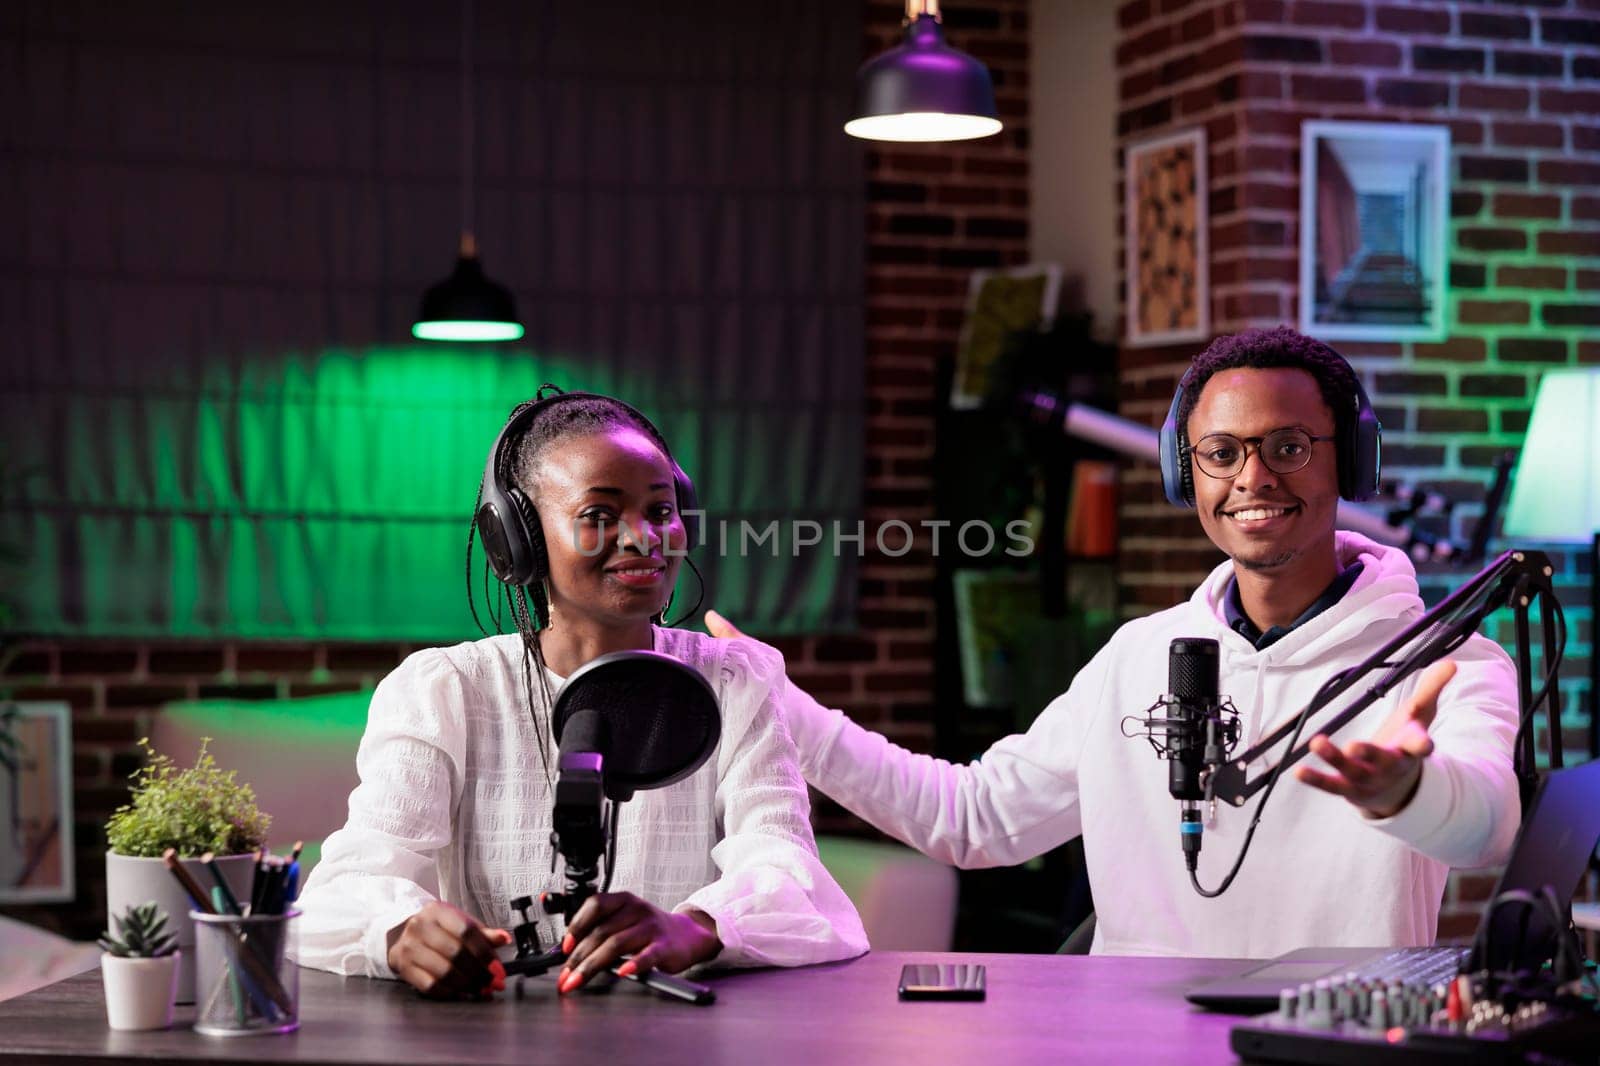 Team of content creators hosting online show in home studio, filming vlog, producing social media content. Vloggers recording episode for streaming service channel, entertaining audiences